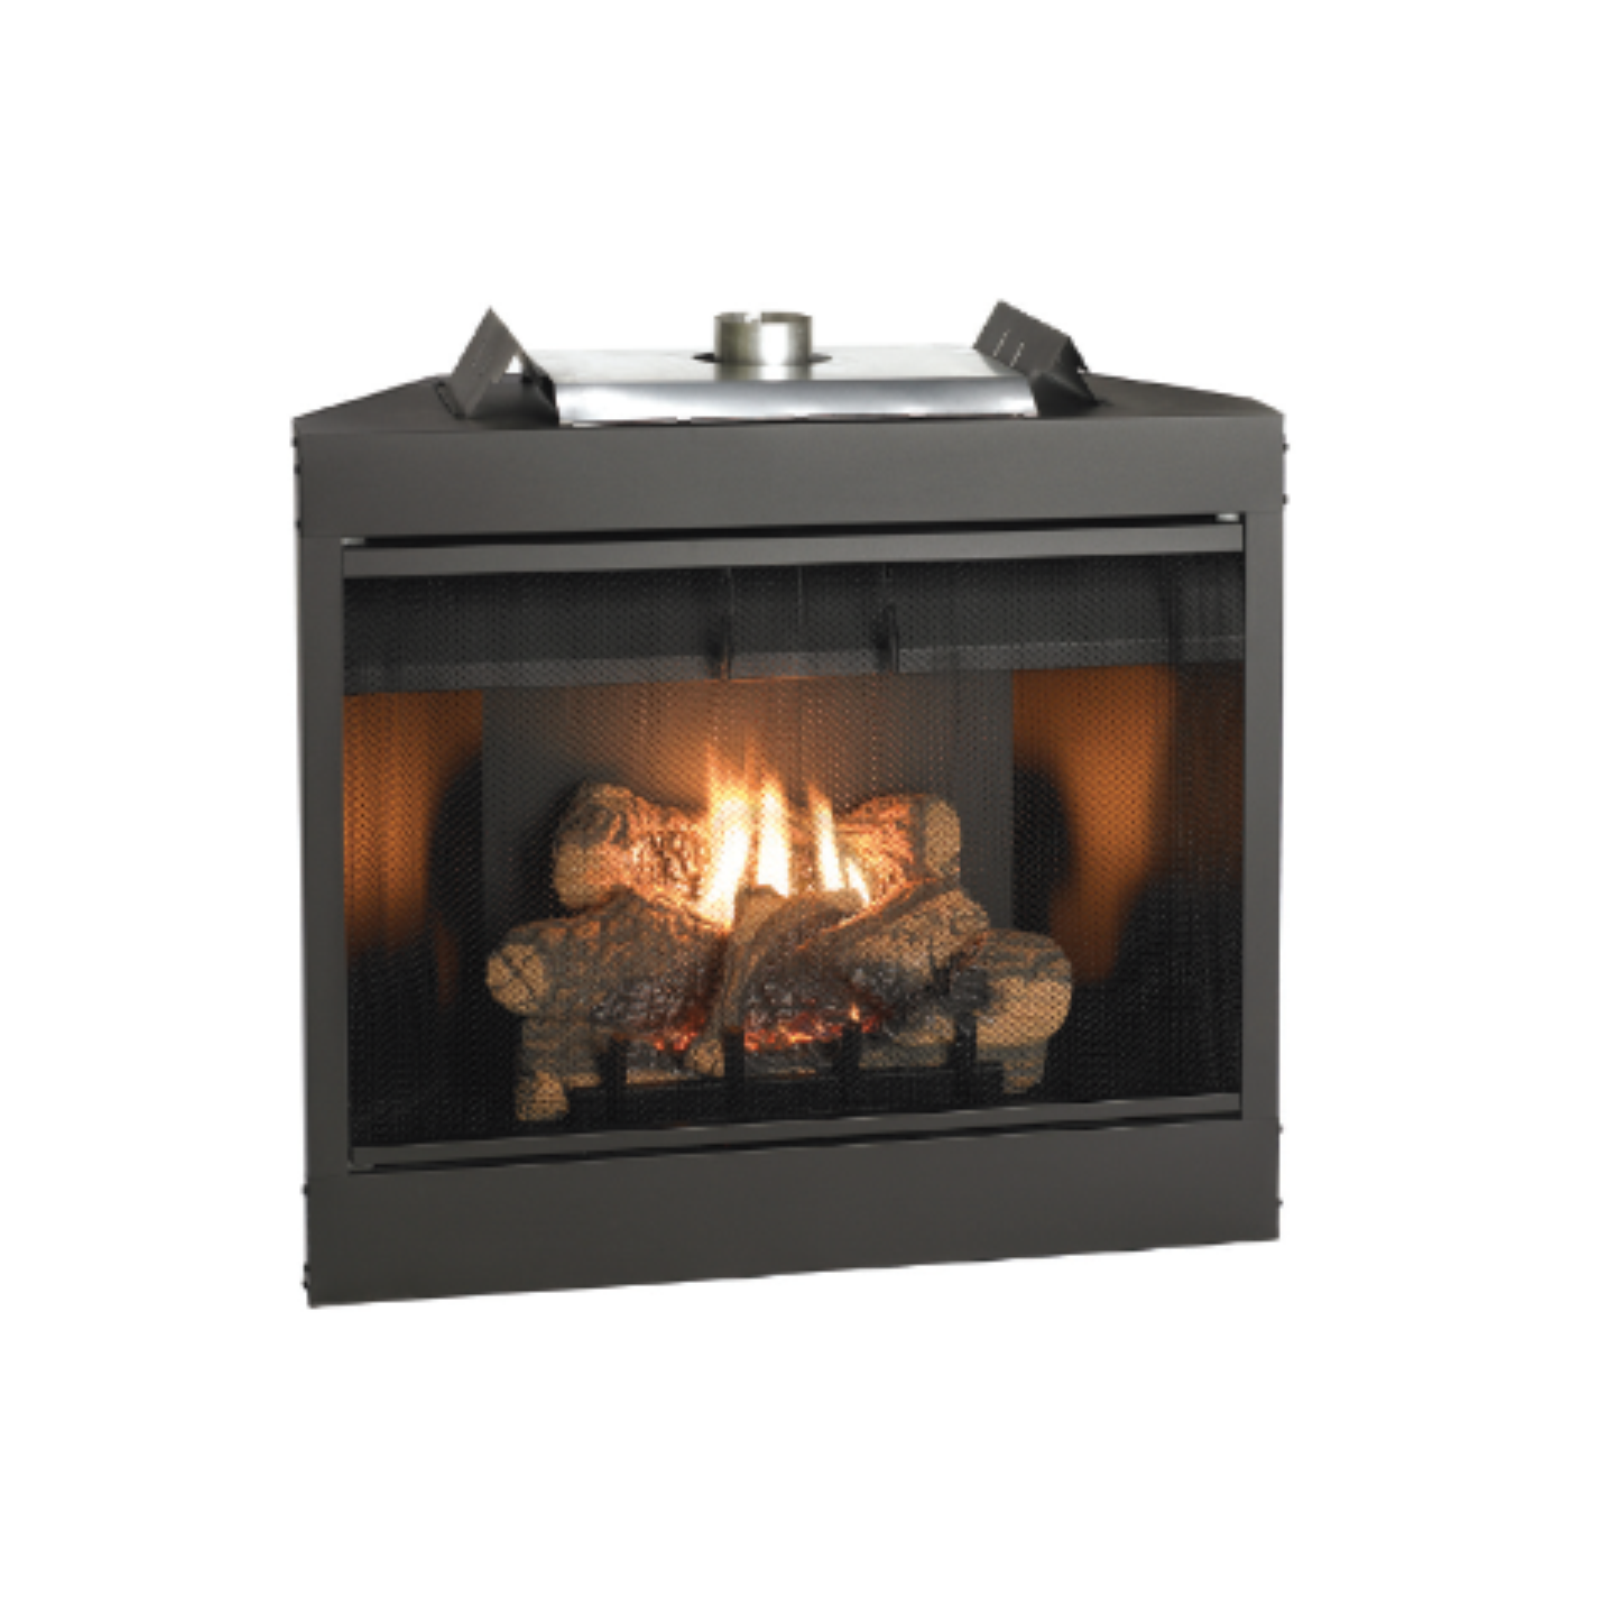 Empire Keystone Deluxe 34 B-Vent Gas Fireplace - BVD34FP